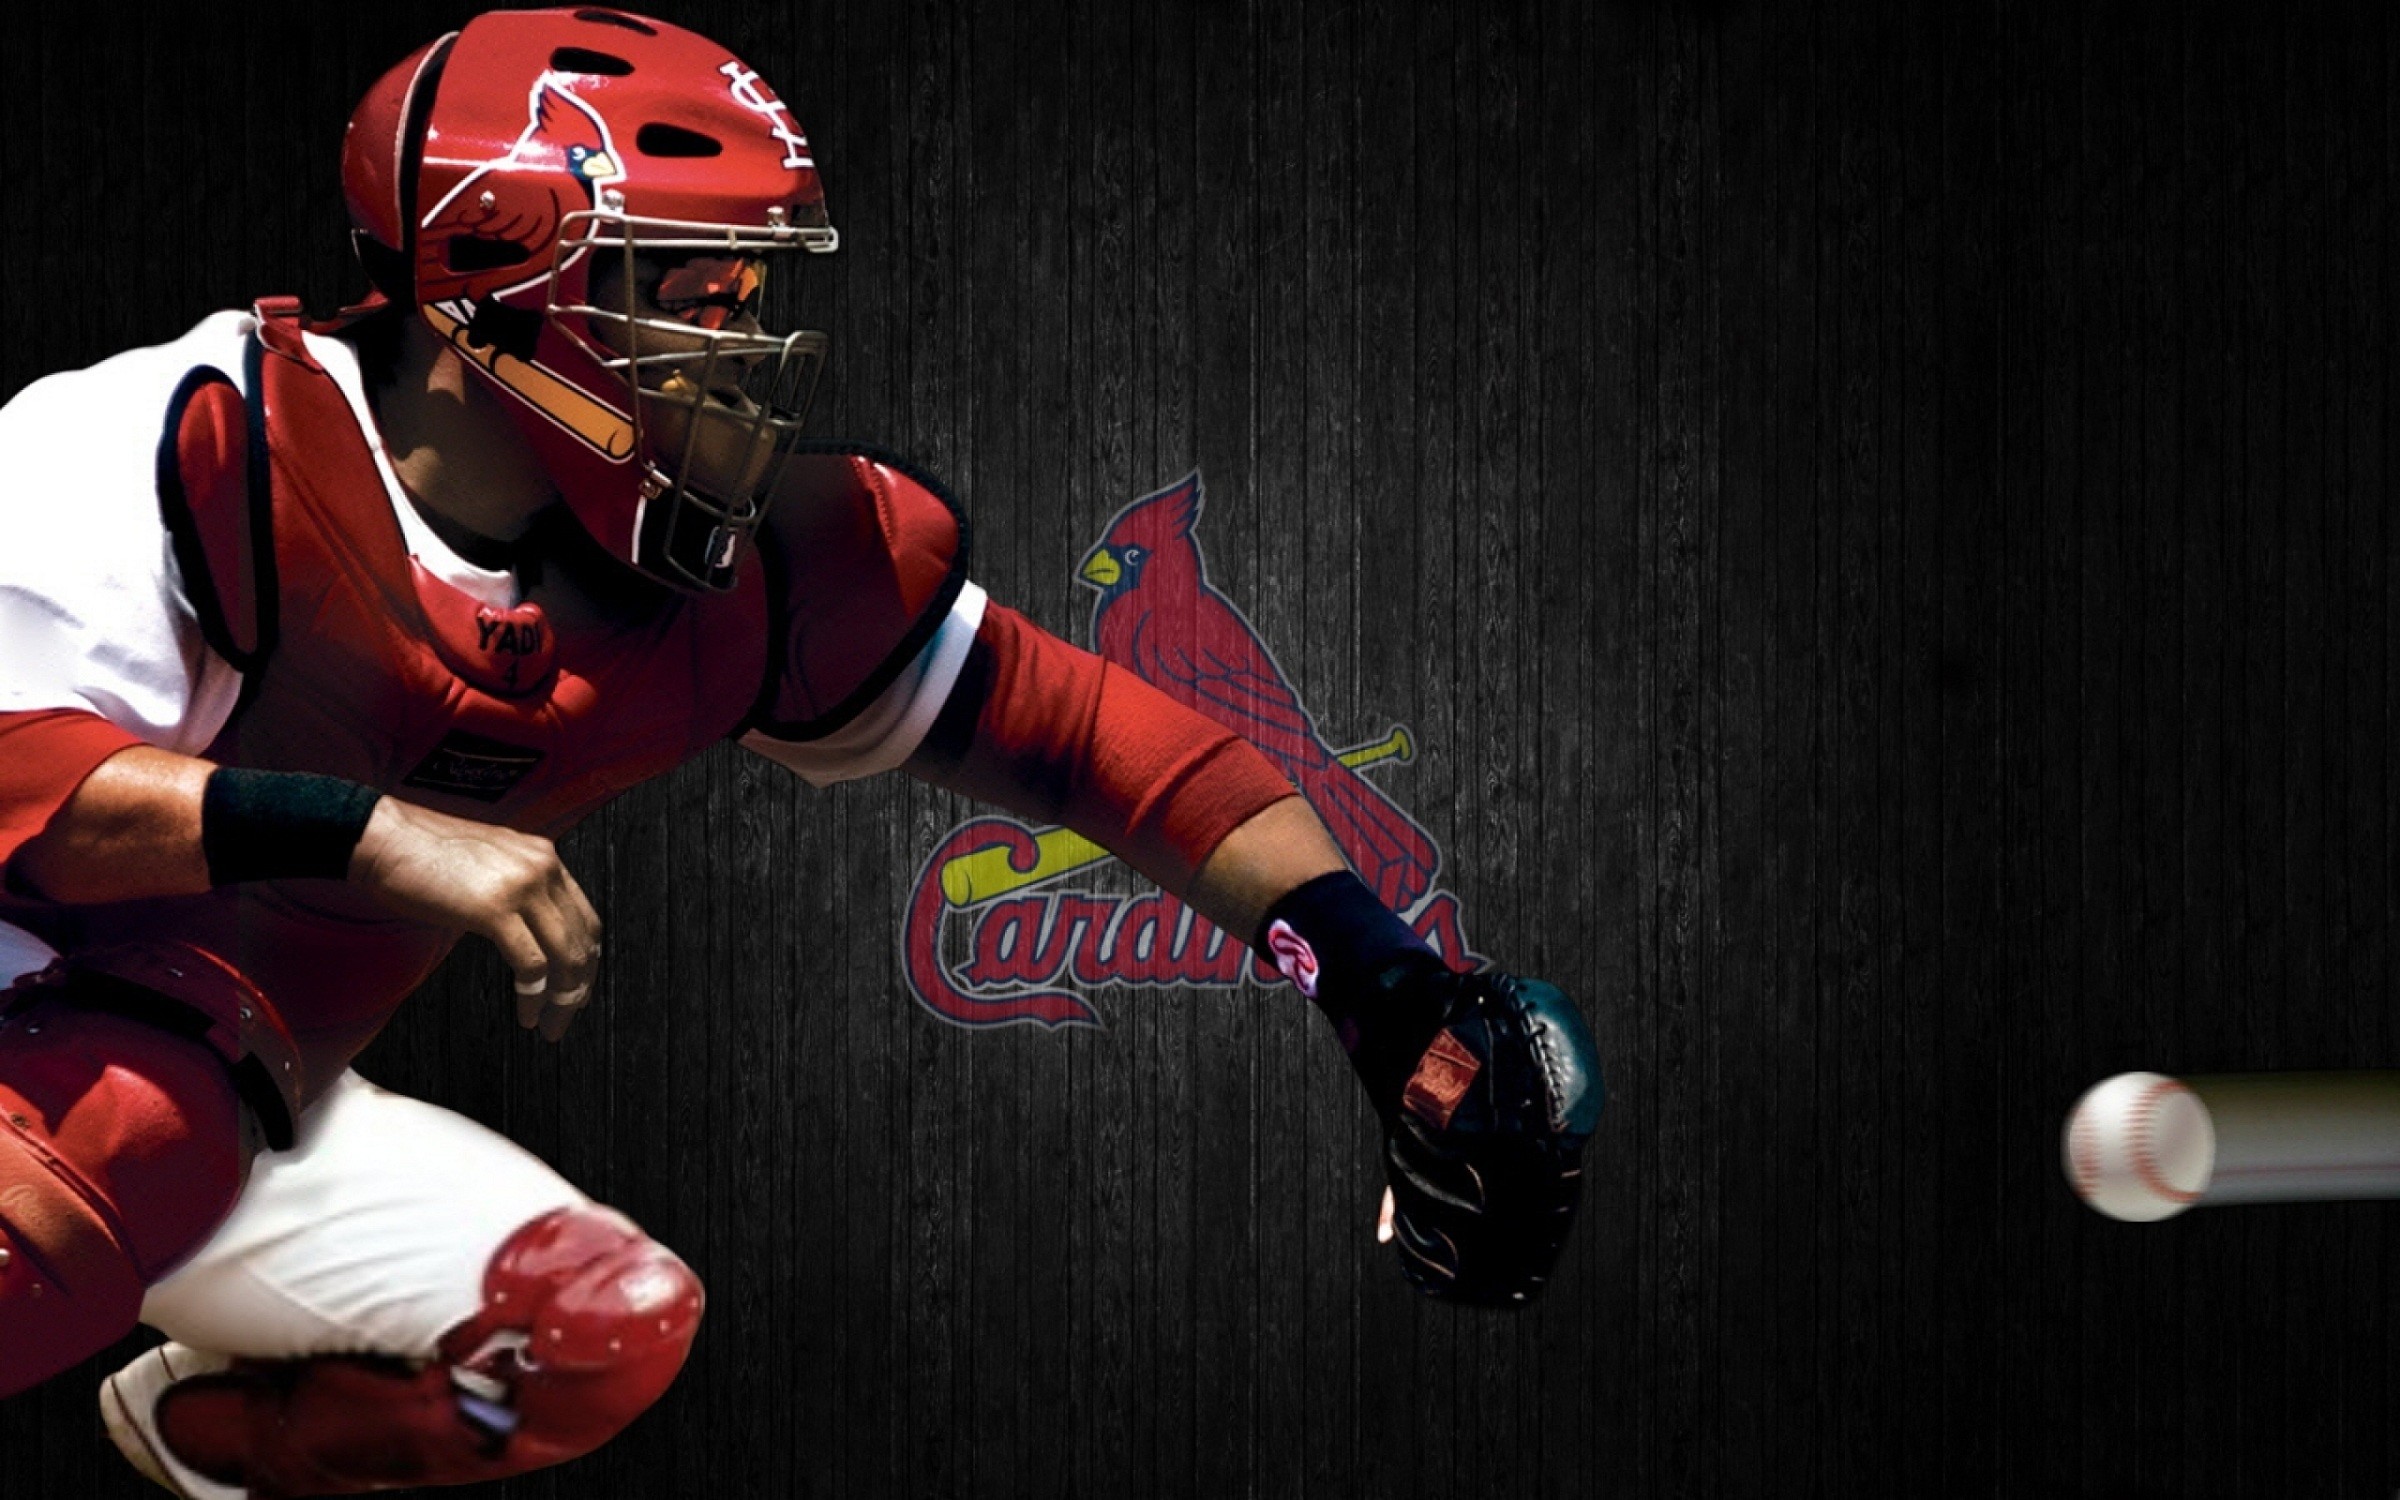 2400x1500 Baseball Wallpapers Free Download HD Wonderful Latest Sports Images  